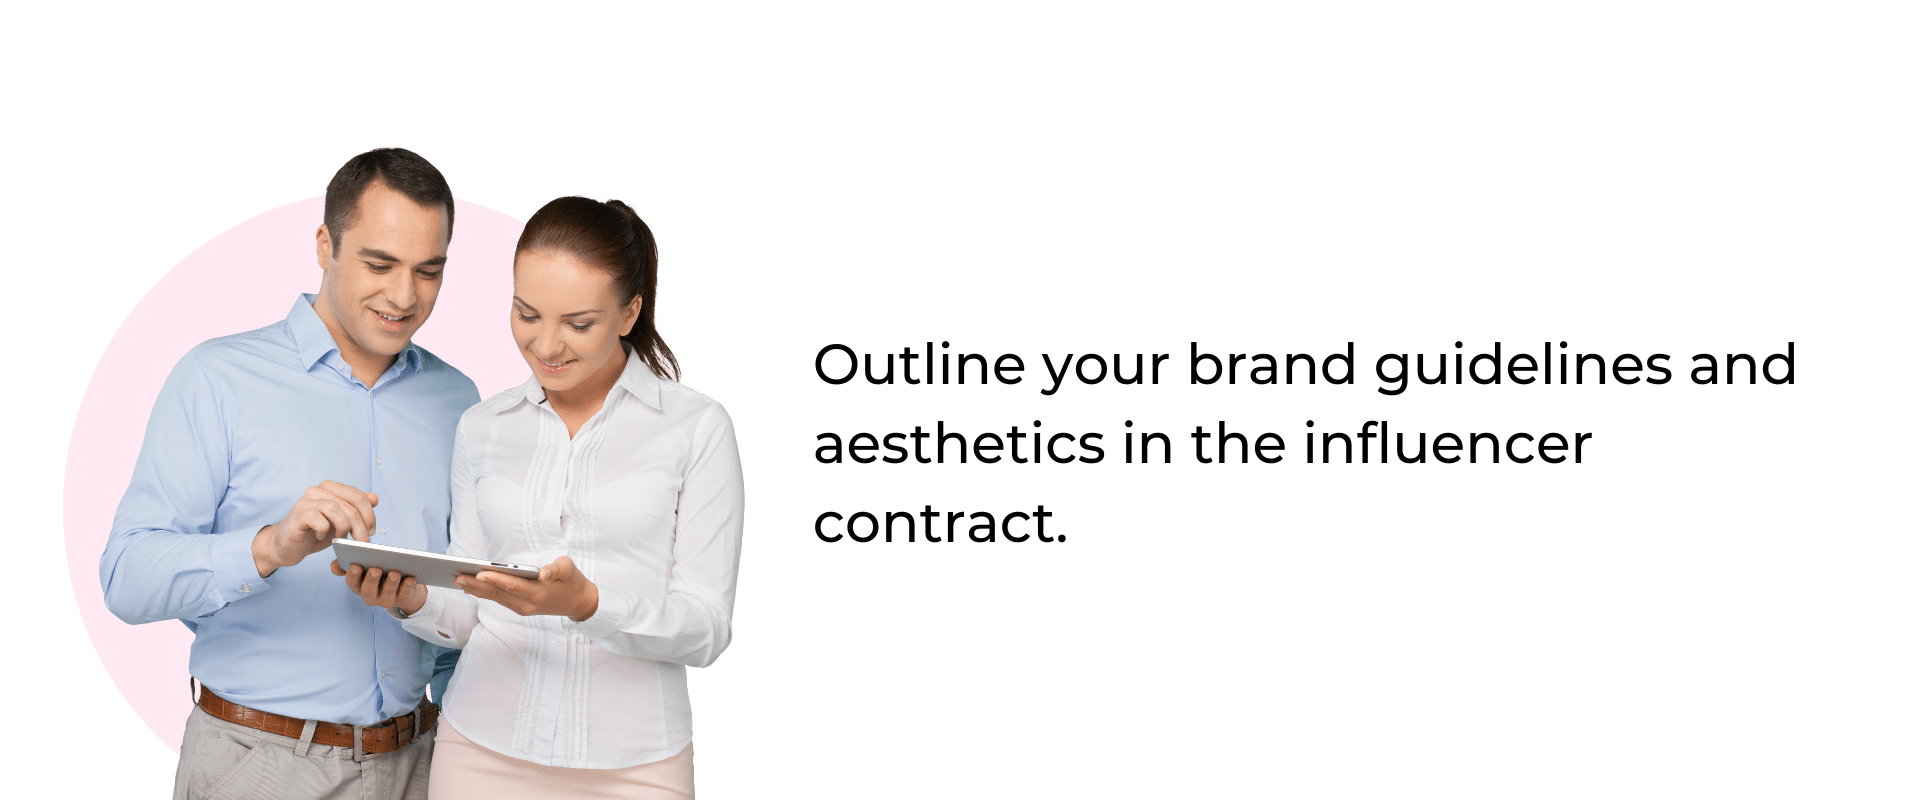 Outline your brand guidelines and aesthetics in the influencer contract.